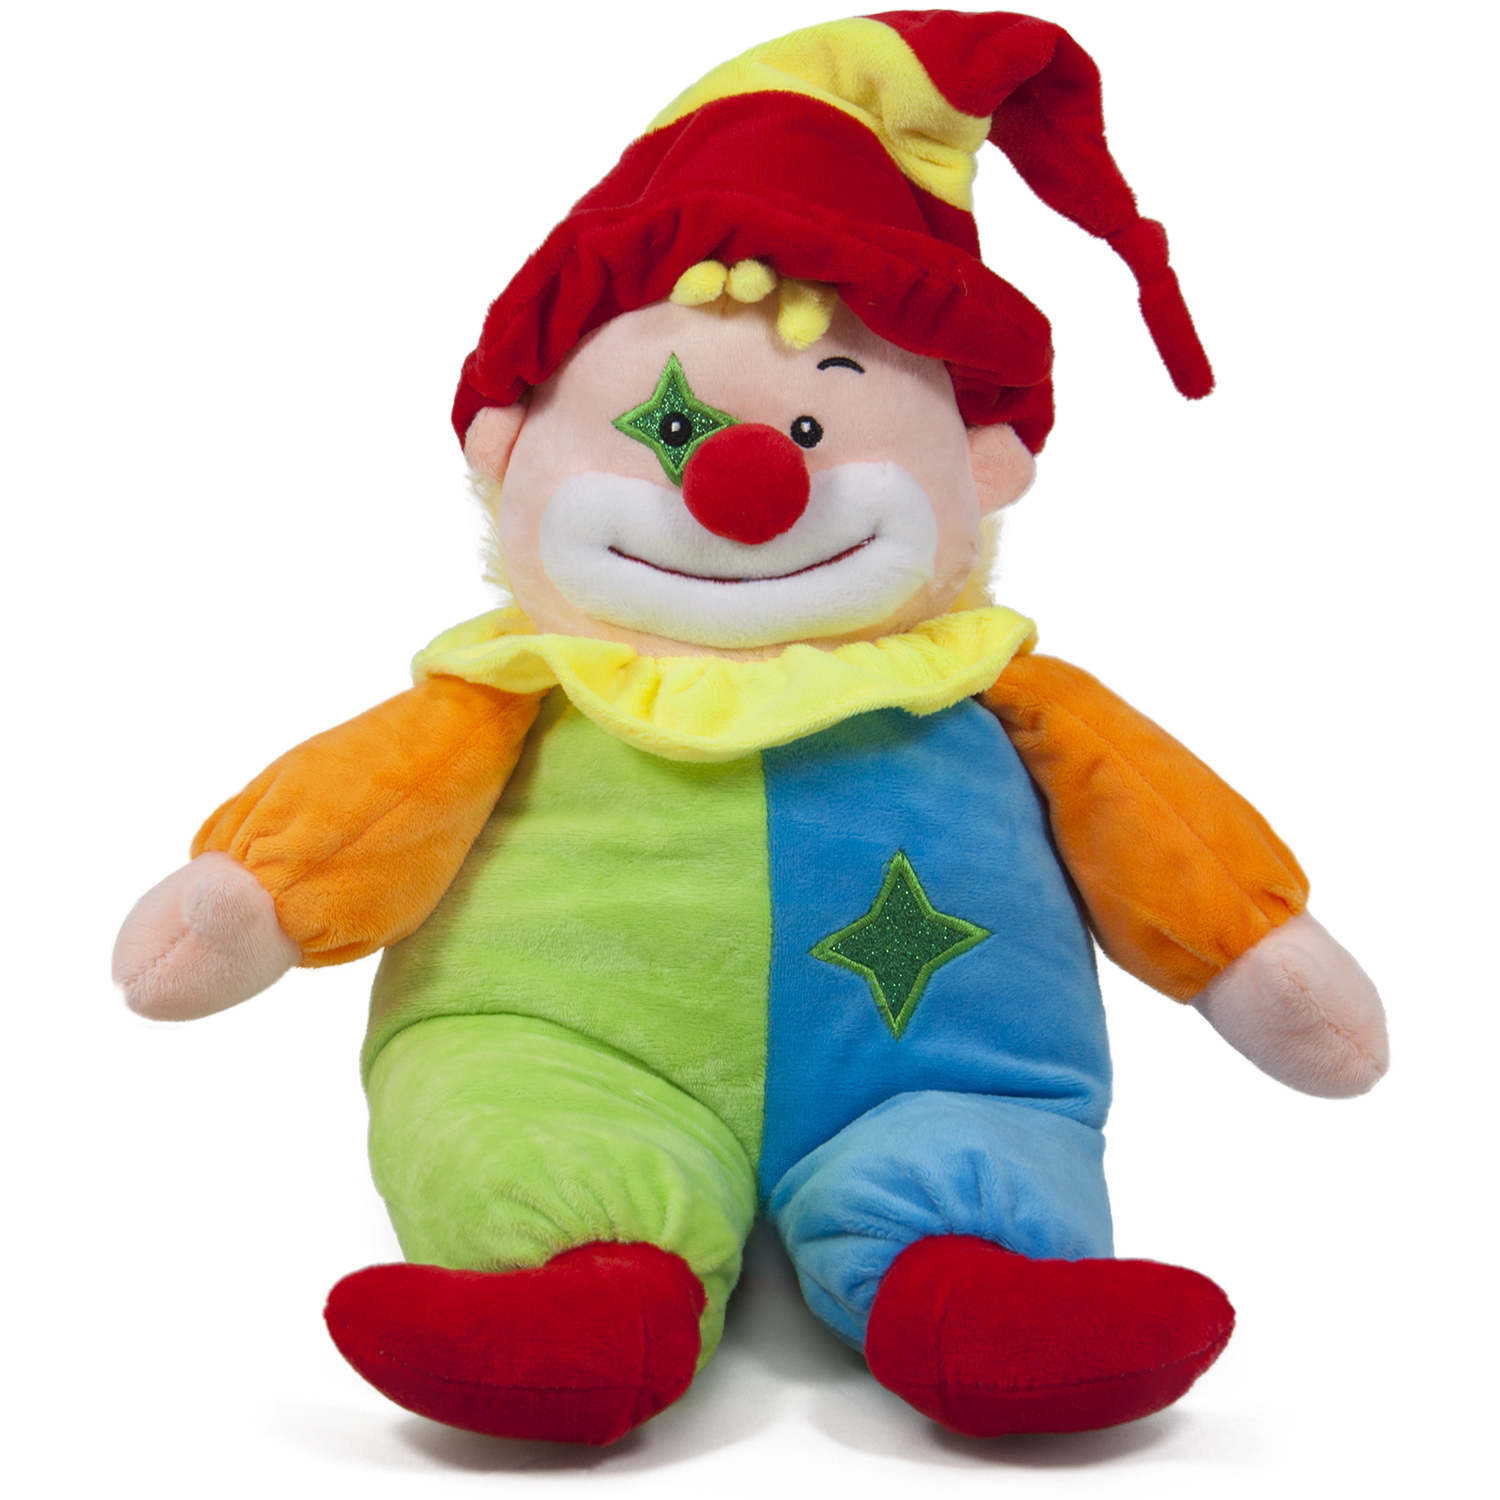 Clown with red hat